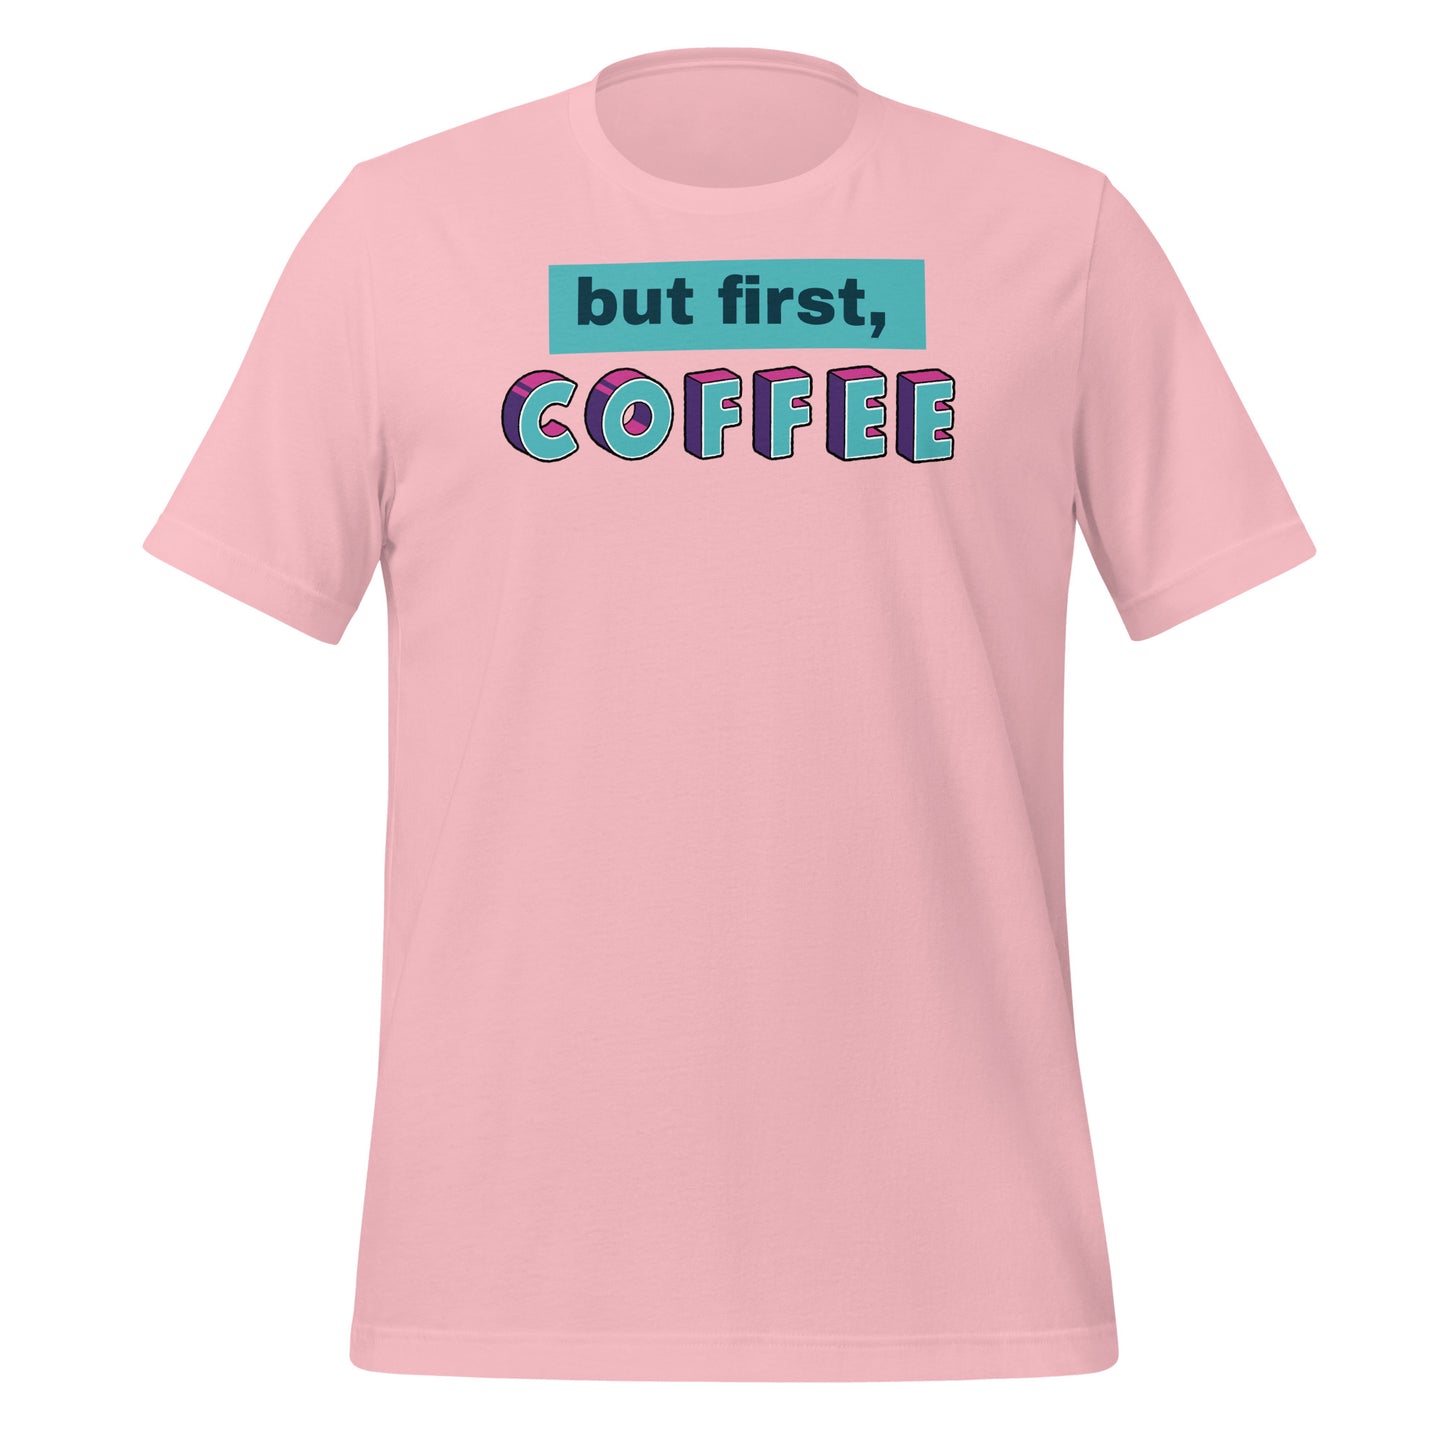 Get Energized with our Stylish 'But First, Coffee' T-shirts